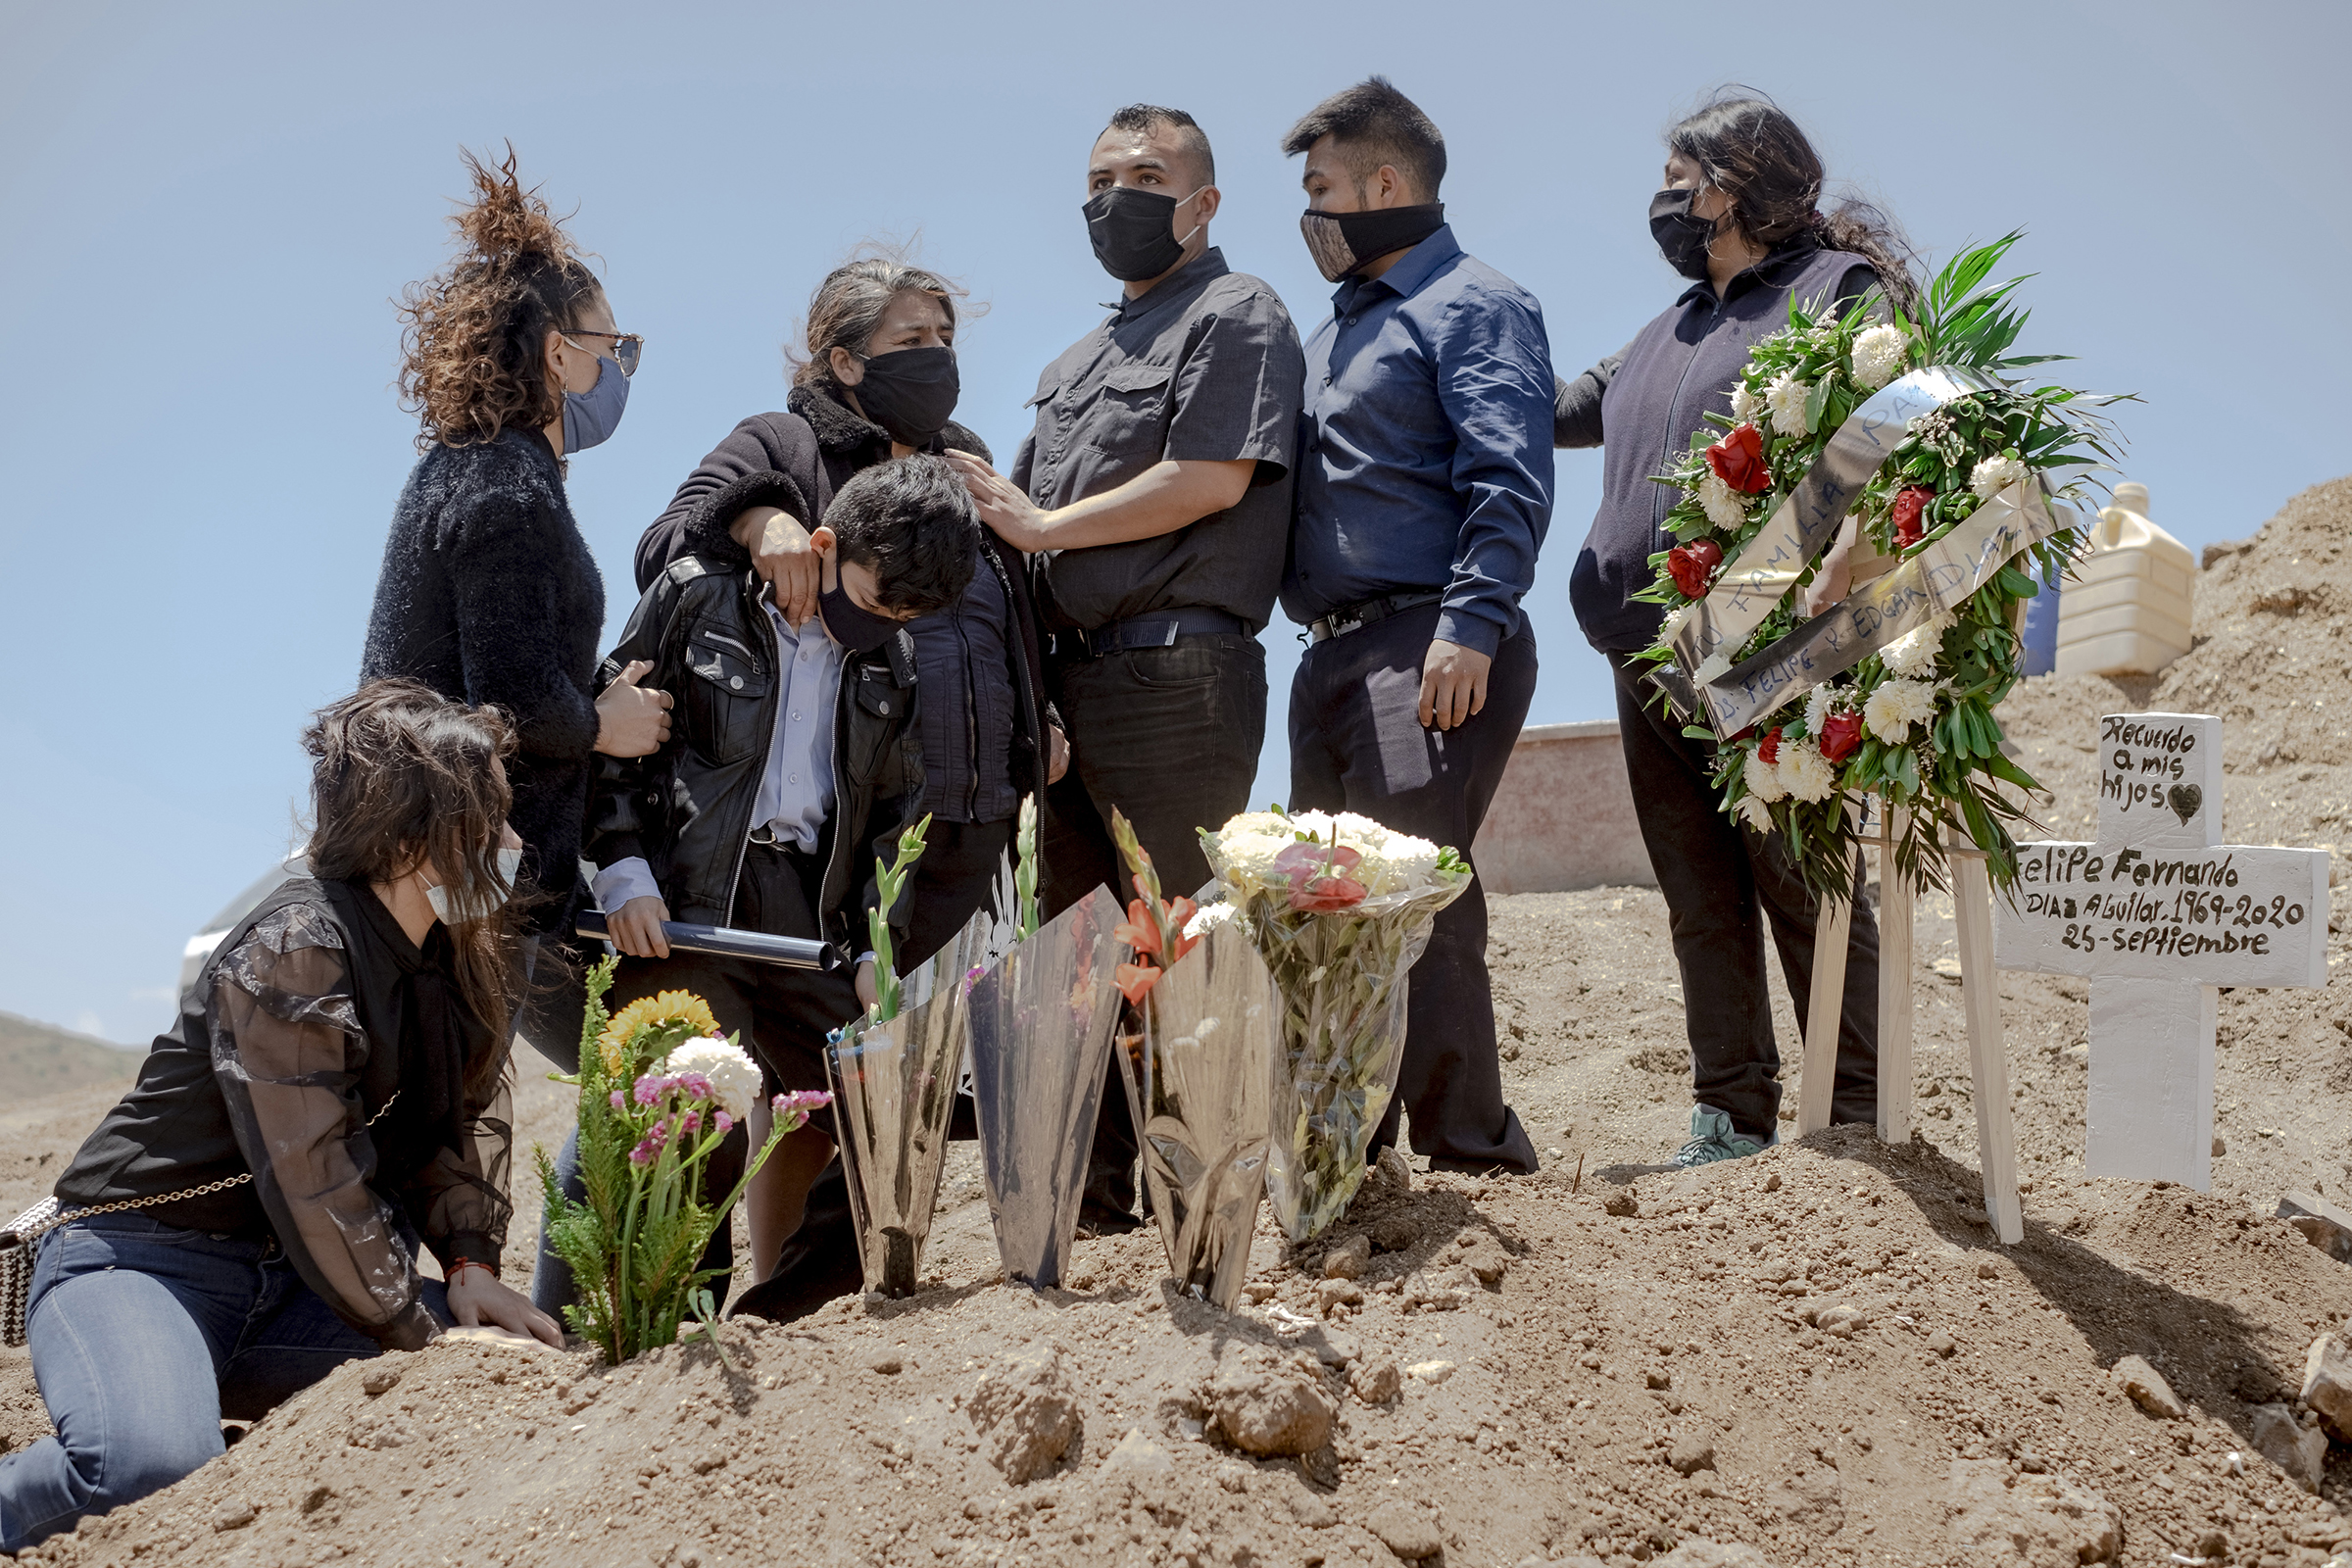 A family wearing protective masks mourns during the burial of a relative who died from coronavirus at Municipal Cemetery No. 13 in Tijuana, Mexico, on May 12.